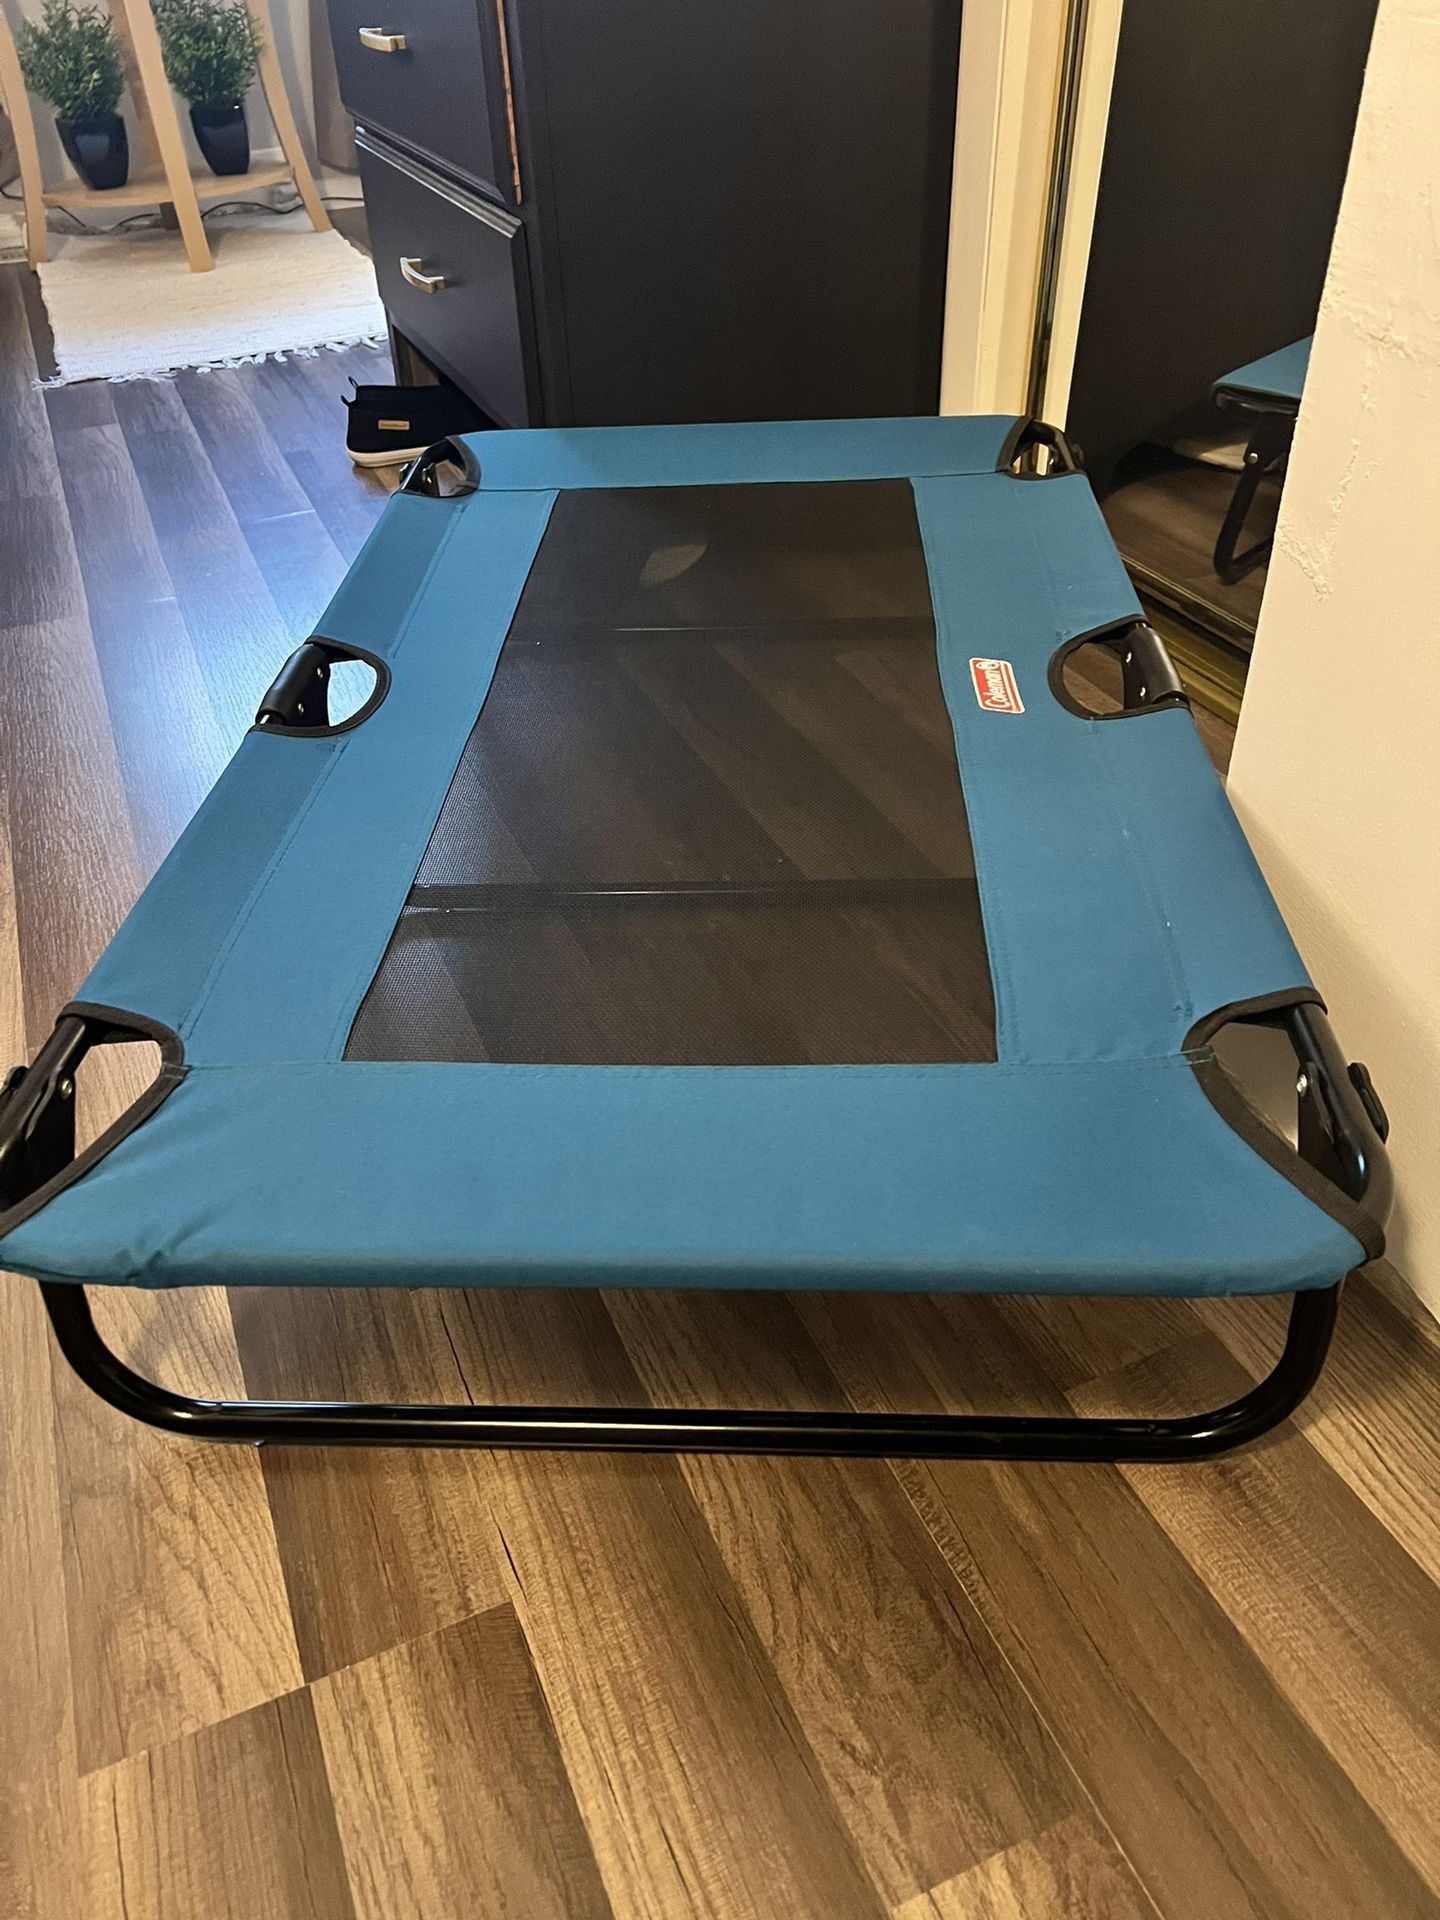 Elevated Dog Cot (foldable & portable)